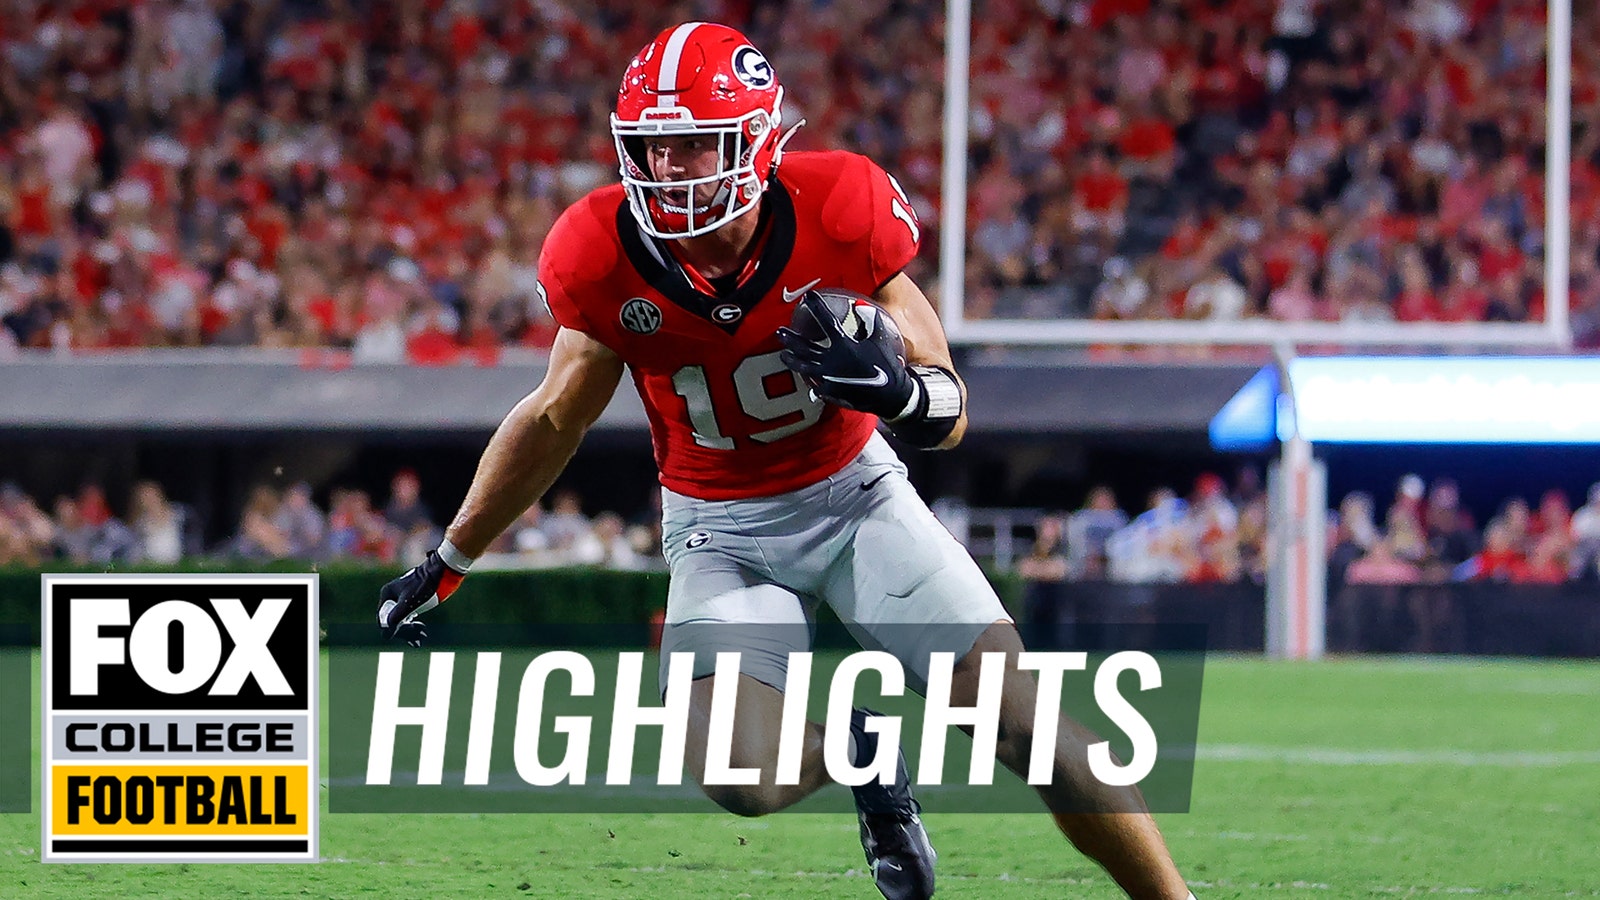 Brock Bowers' highlights during his career with the Georgia Bulldogs